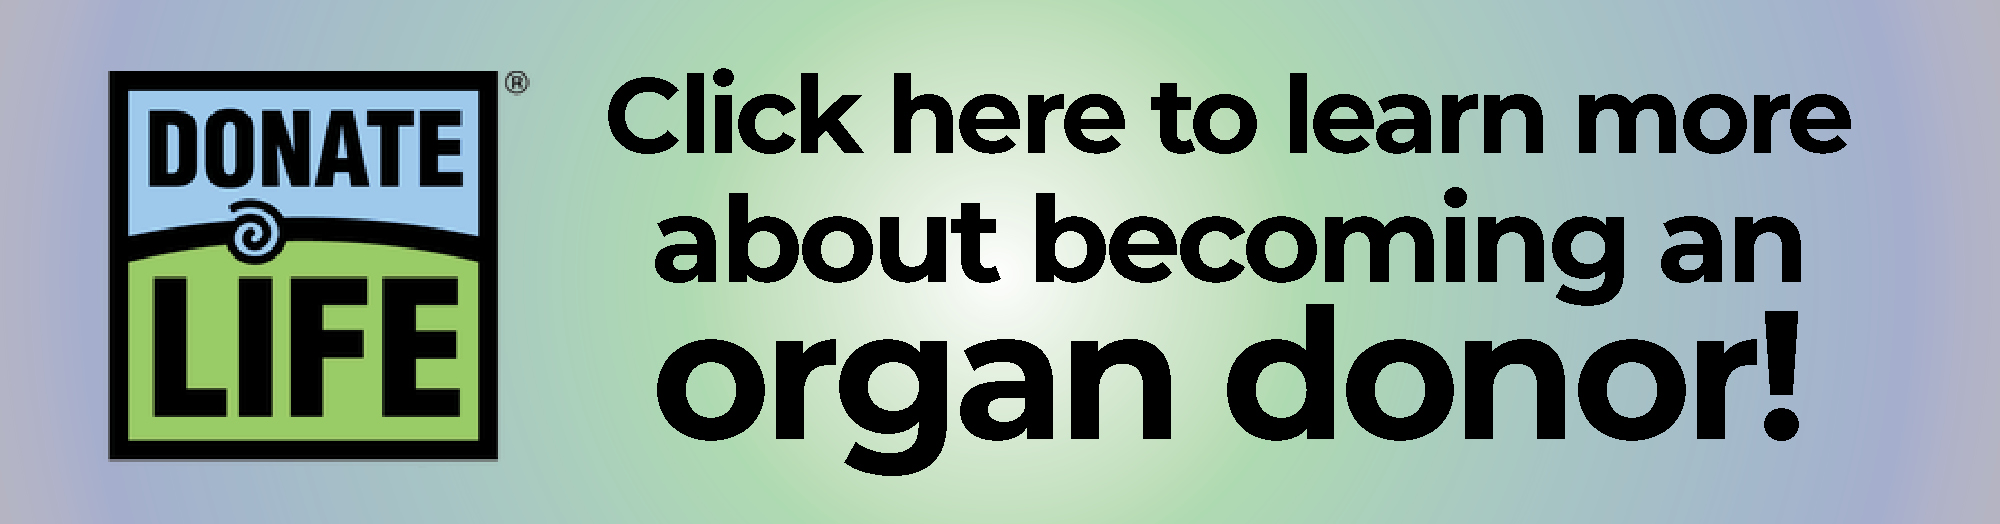 Donate Life Become An Organ Donor